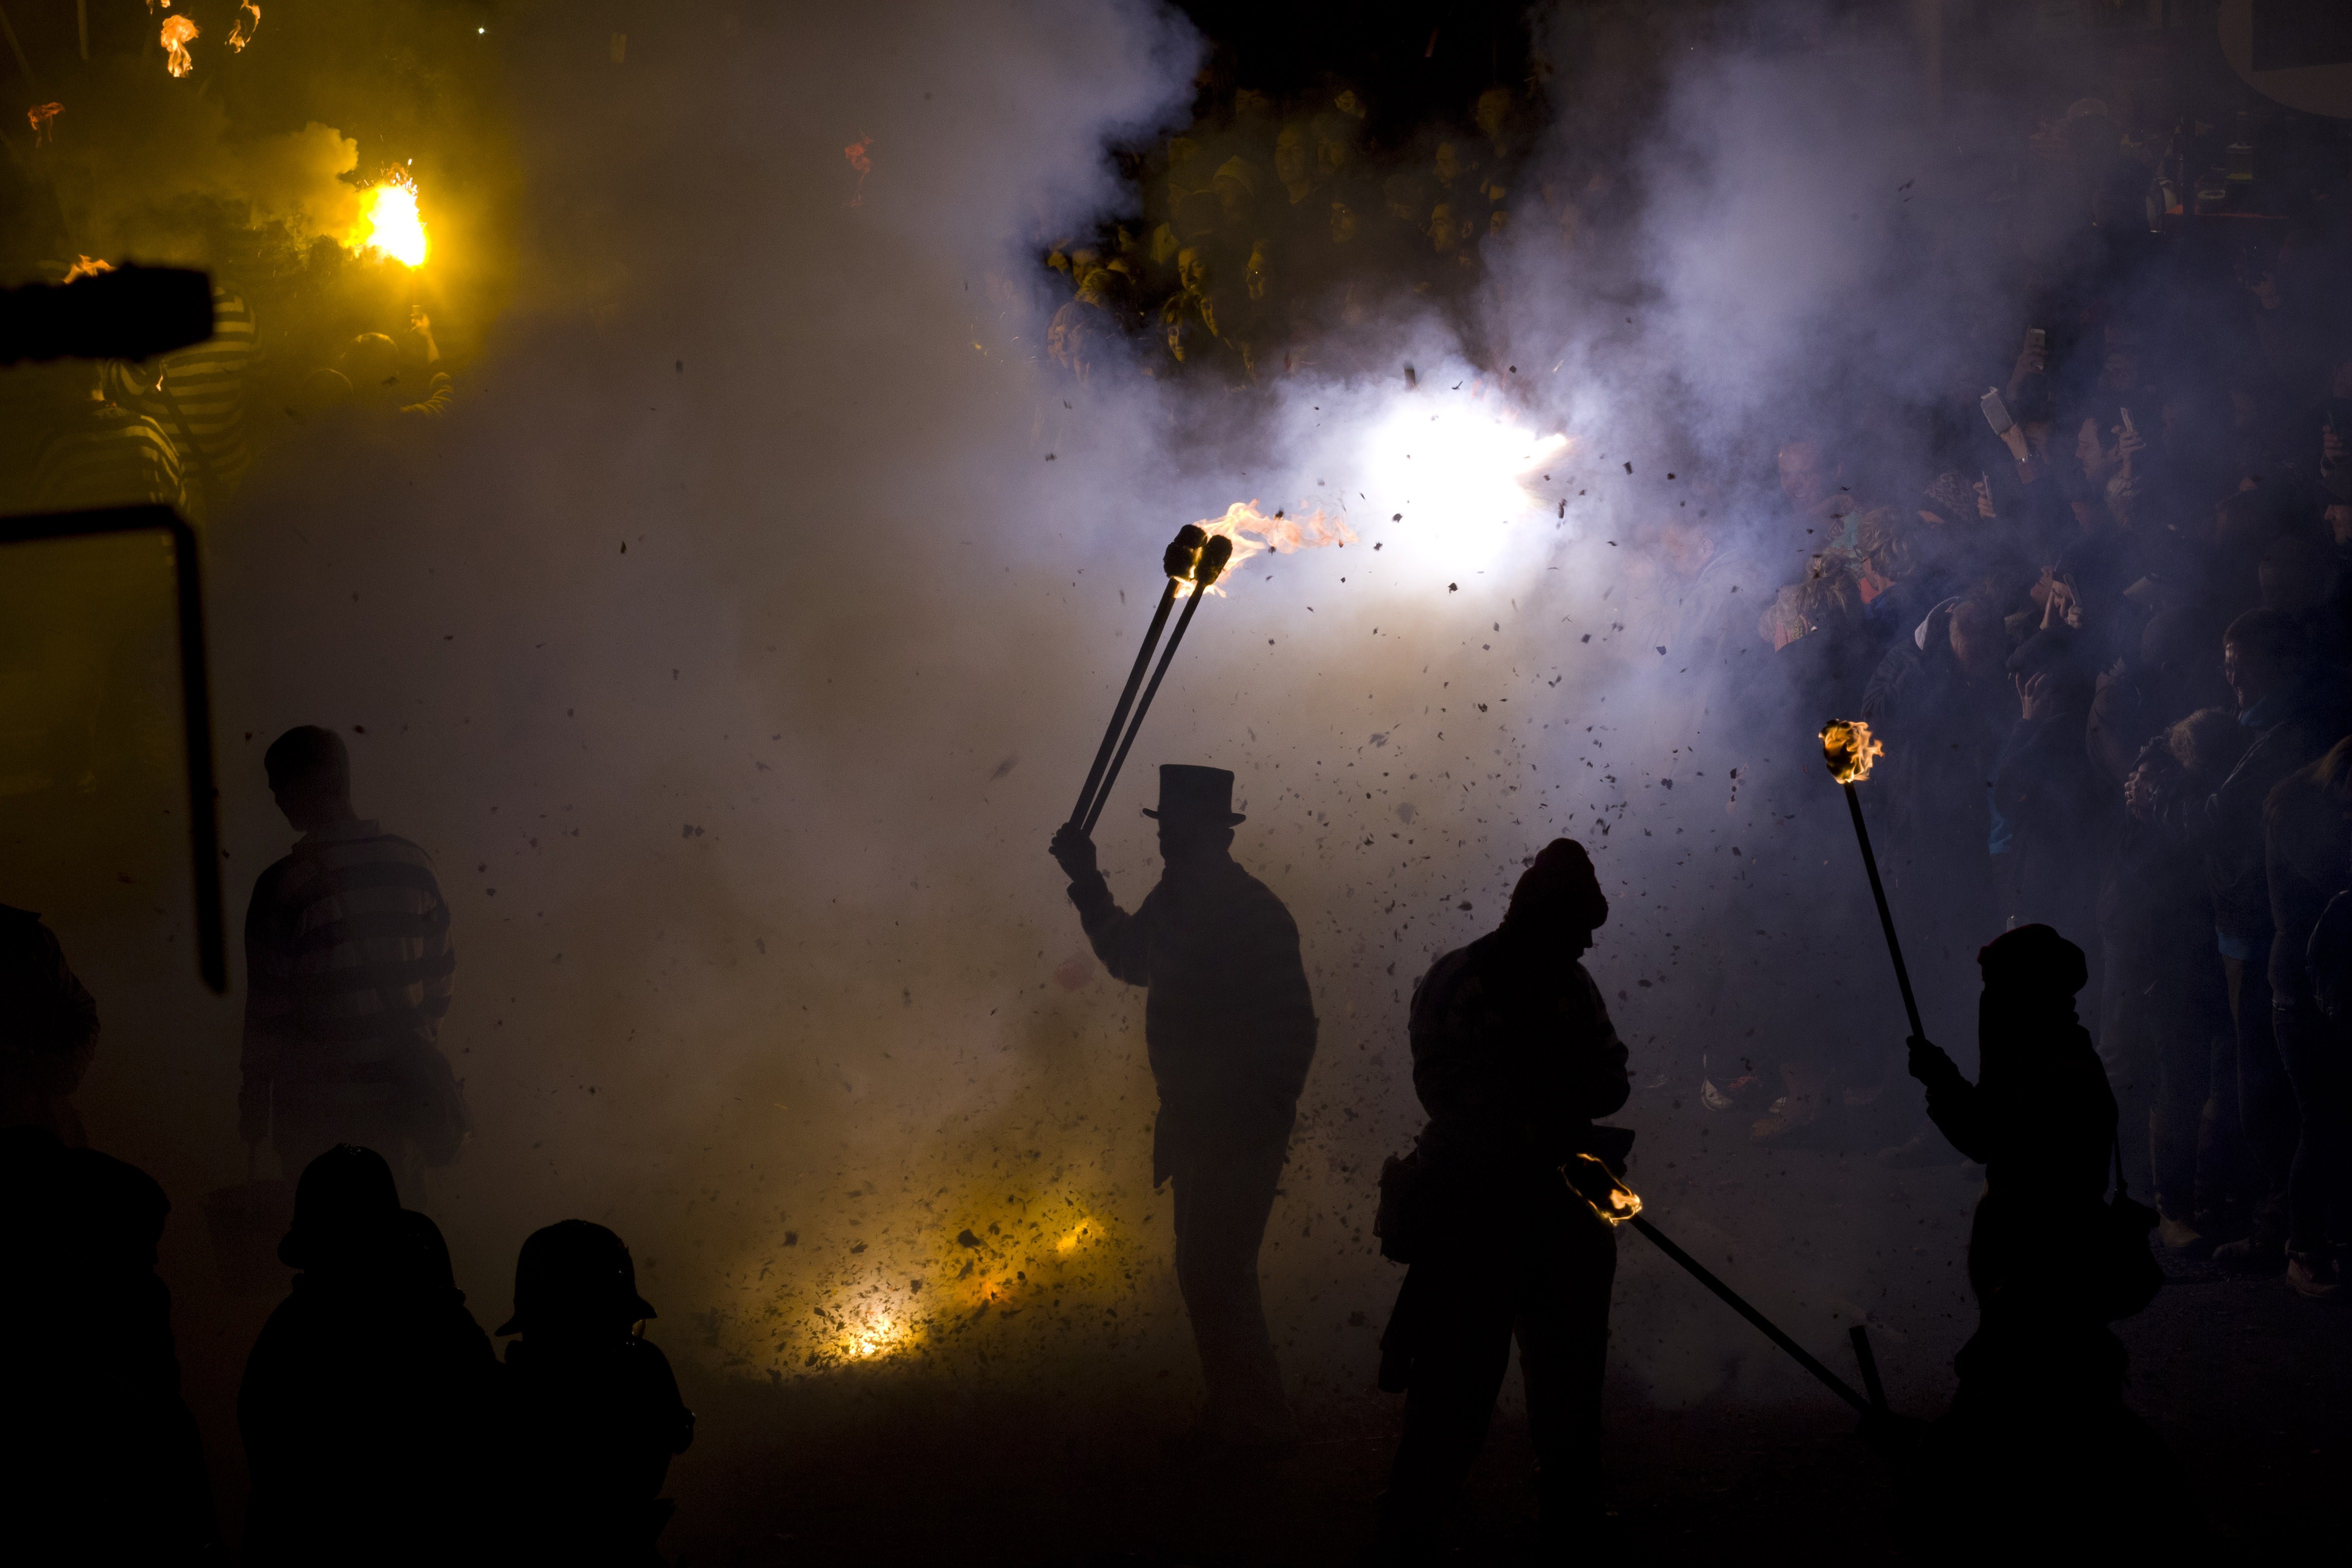 Bonfire societies parade through the streets of Lewes in Sussex, during the traditional Bonfire Night celebrations on Nov. 5, 2014. (Justin Tallis—AFP/Getty Images)